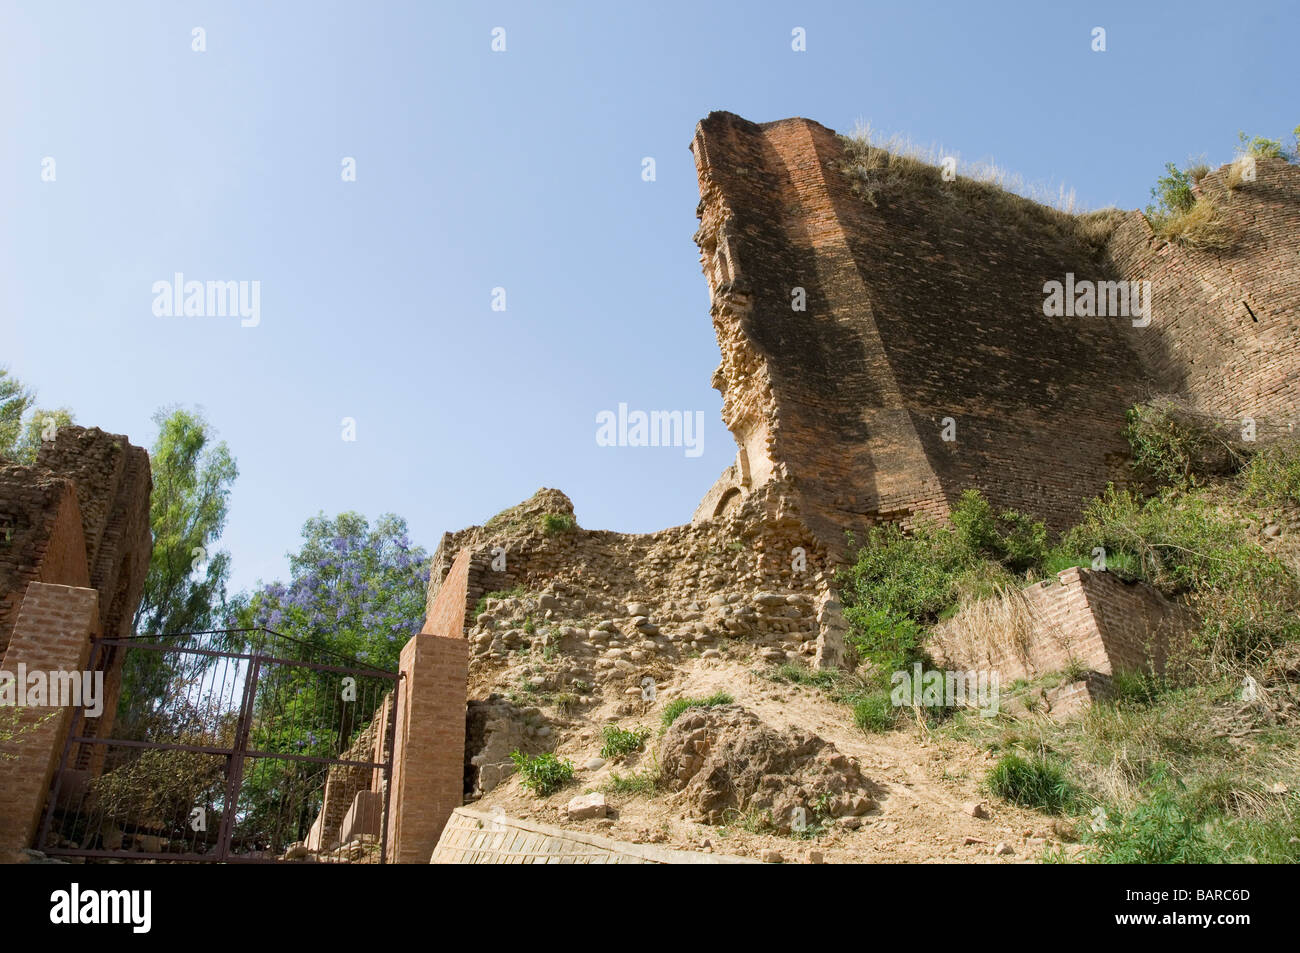 Old ruins of a building, Indus Valley Civilization, Jammu and Kashmir, India Stock Photo